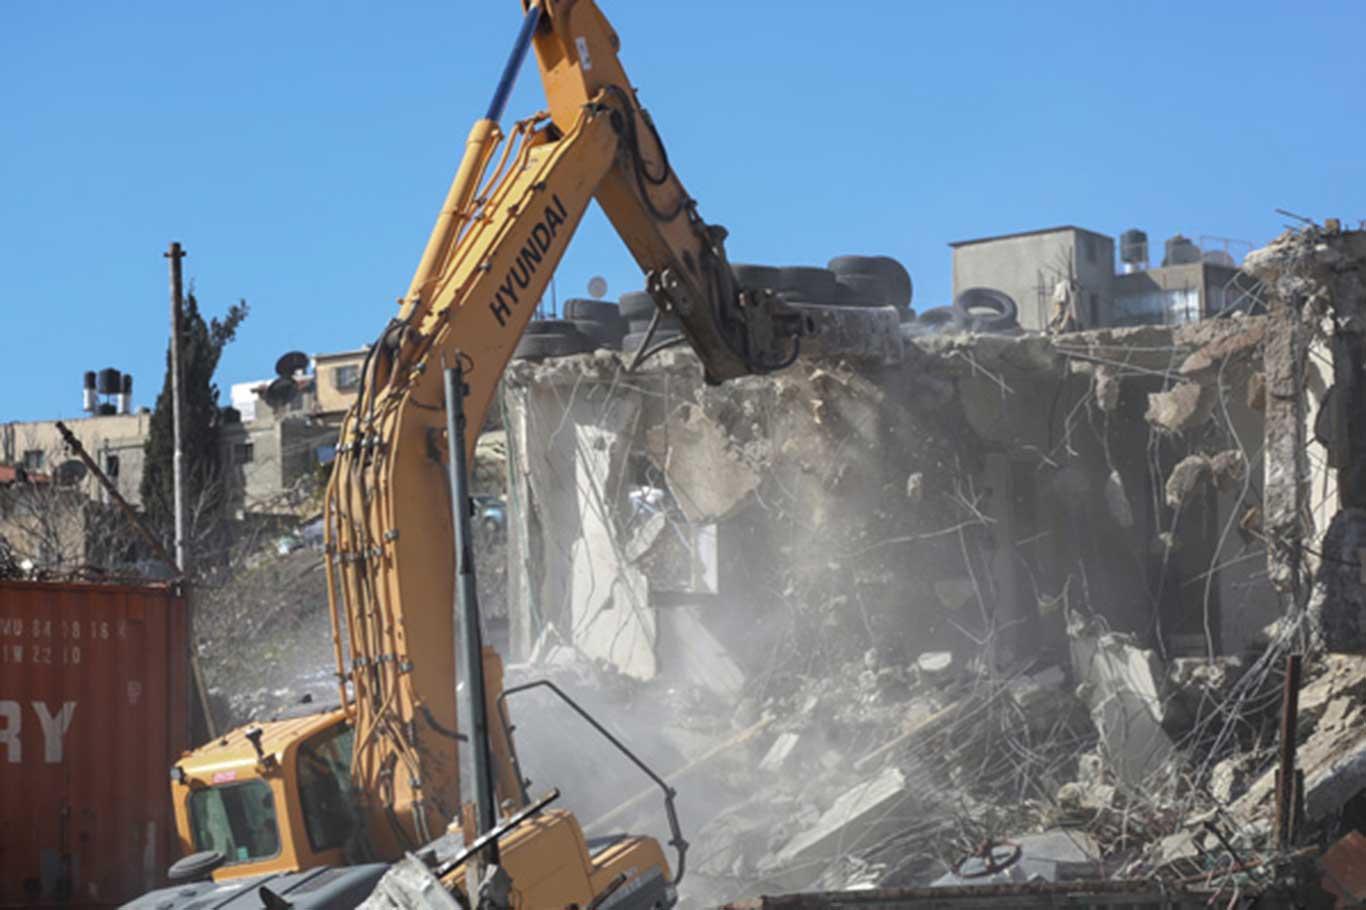 Zionist occupation gangs demolish Palestinian house in the West Bank